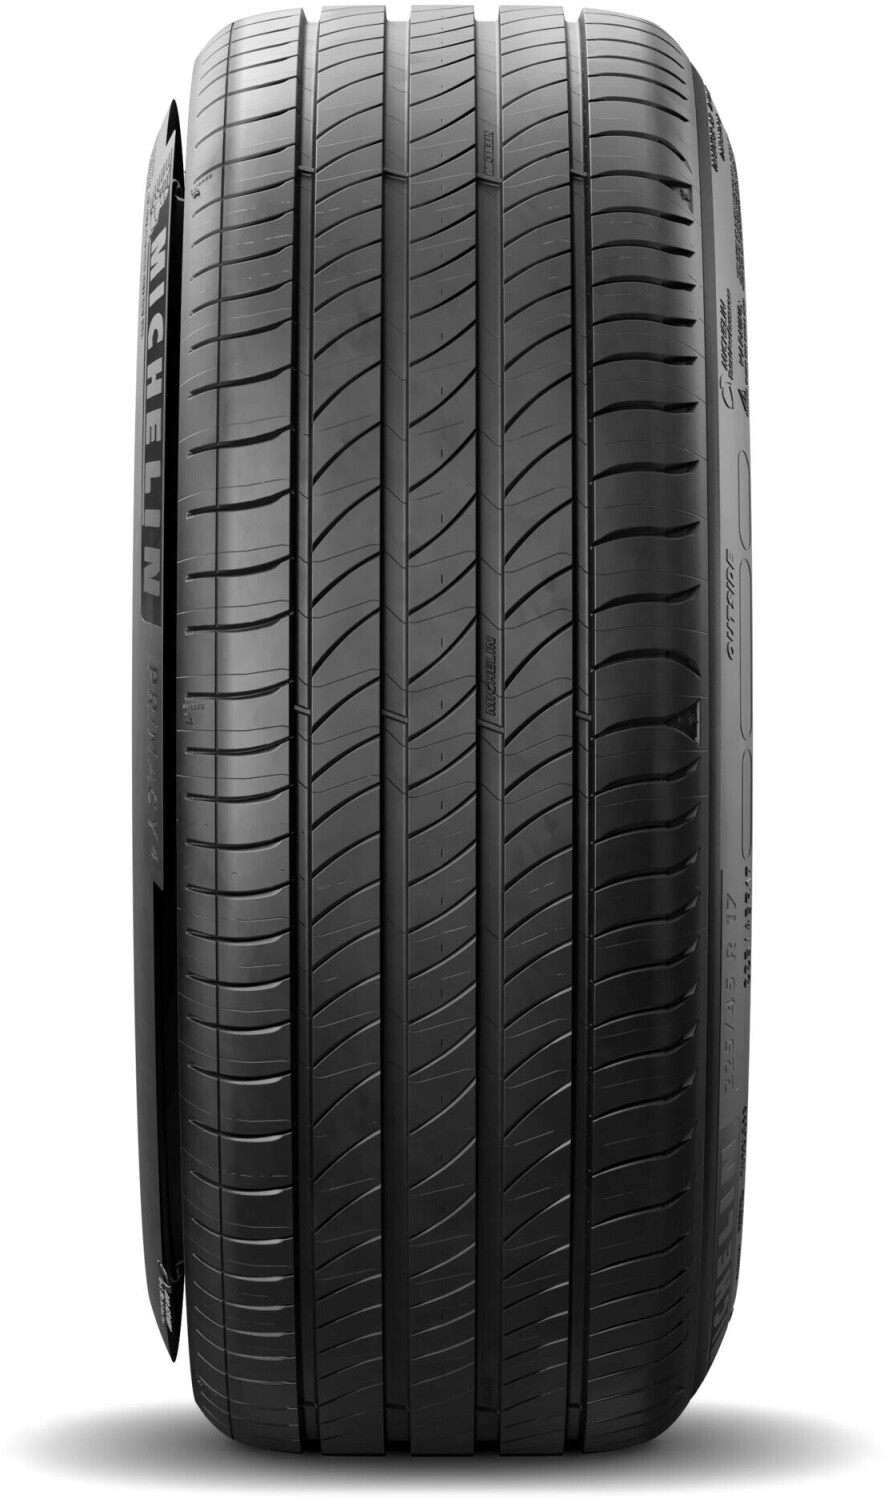 Buy Michelin Primacy 4 R17 – on Best 225/45 from (Today) S1 Deals 94V XL £108.51